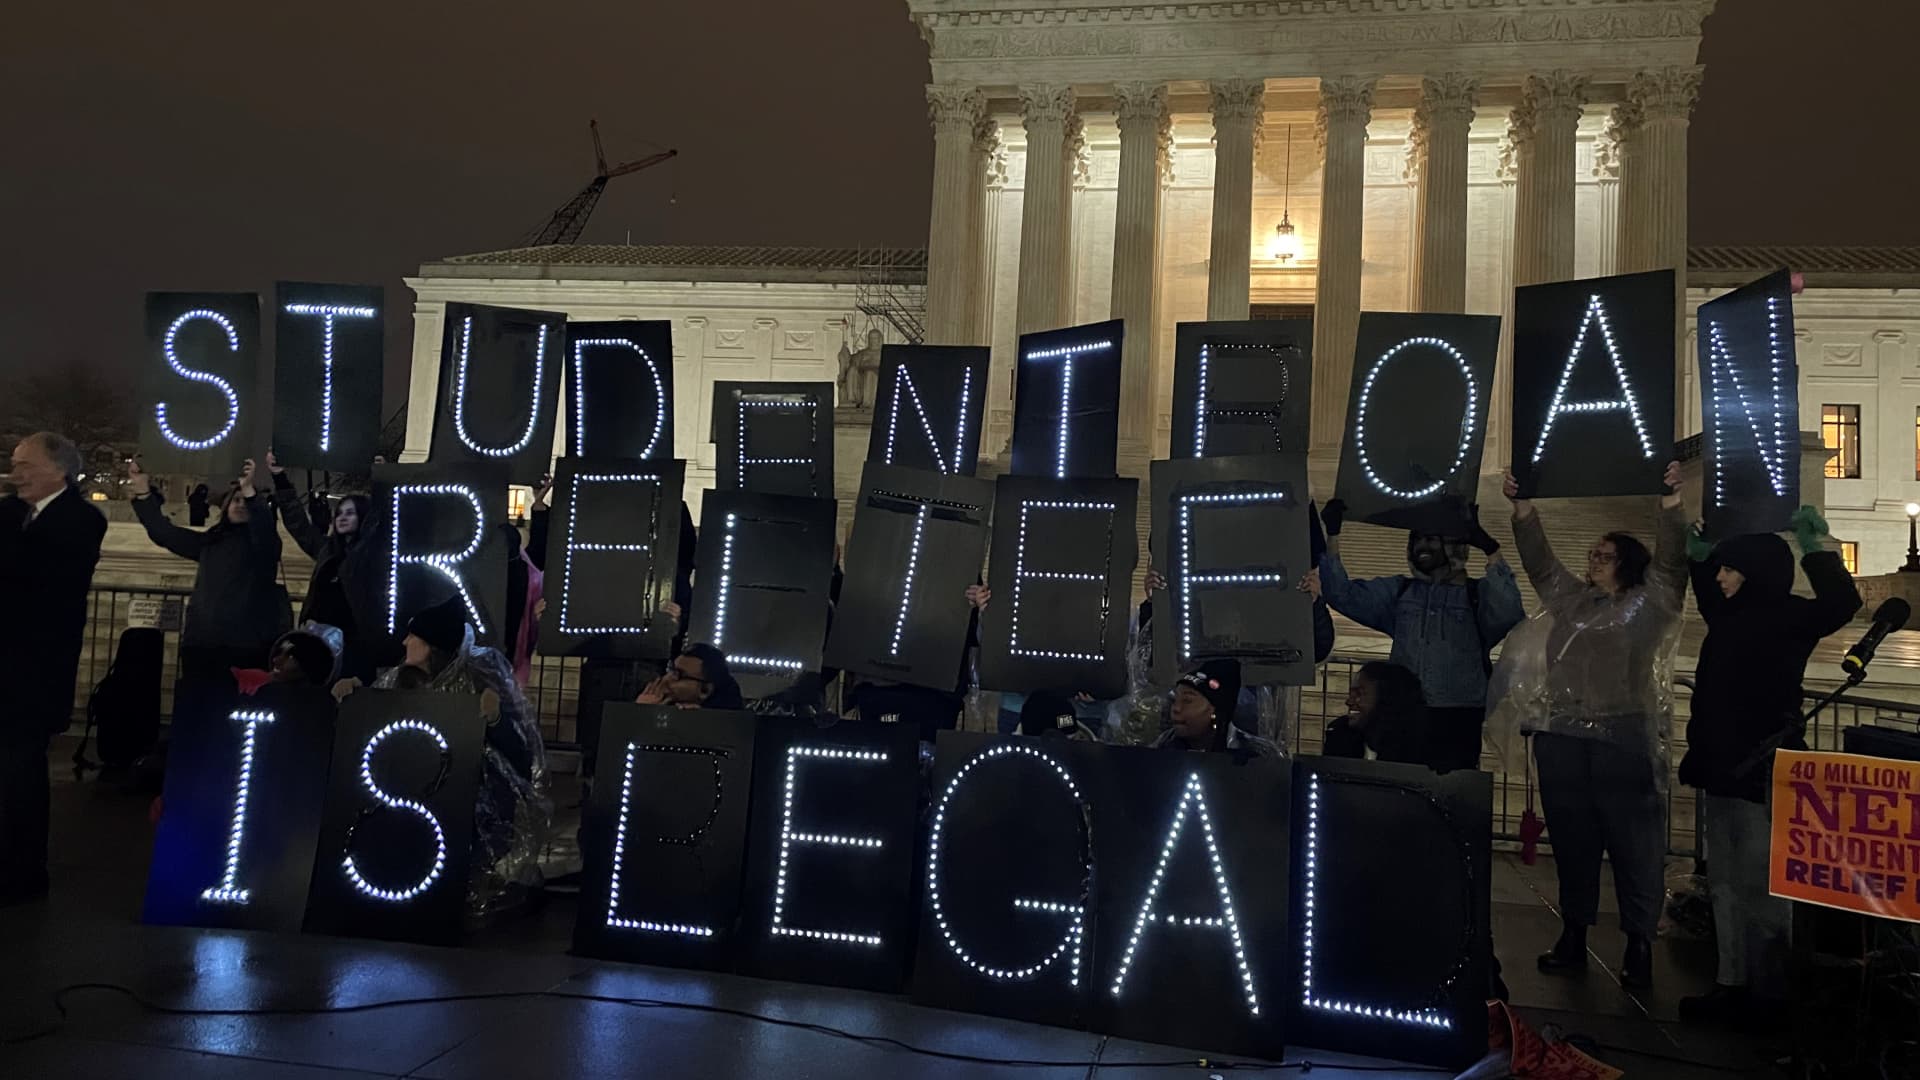 Student loan borrowers gathered outside the U.S. Supreme Court on Feb. 27, 2023, the night before the court hears two cases on student loan forgiveness.